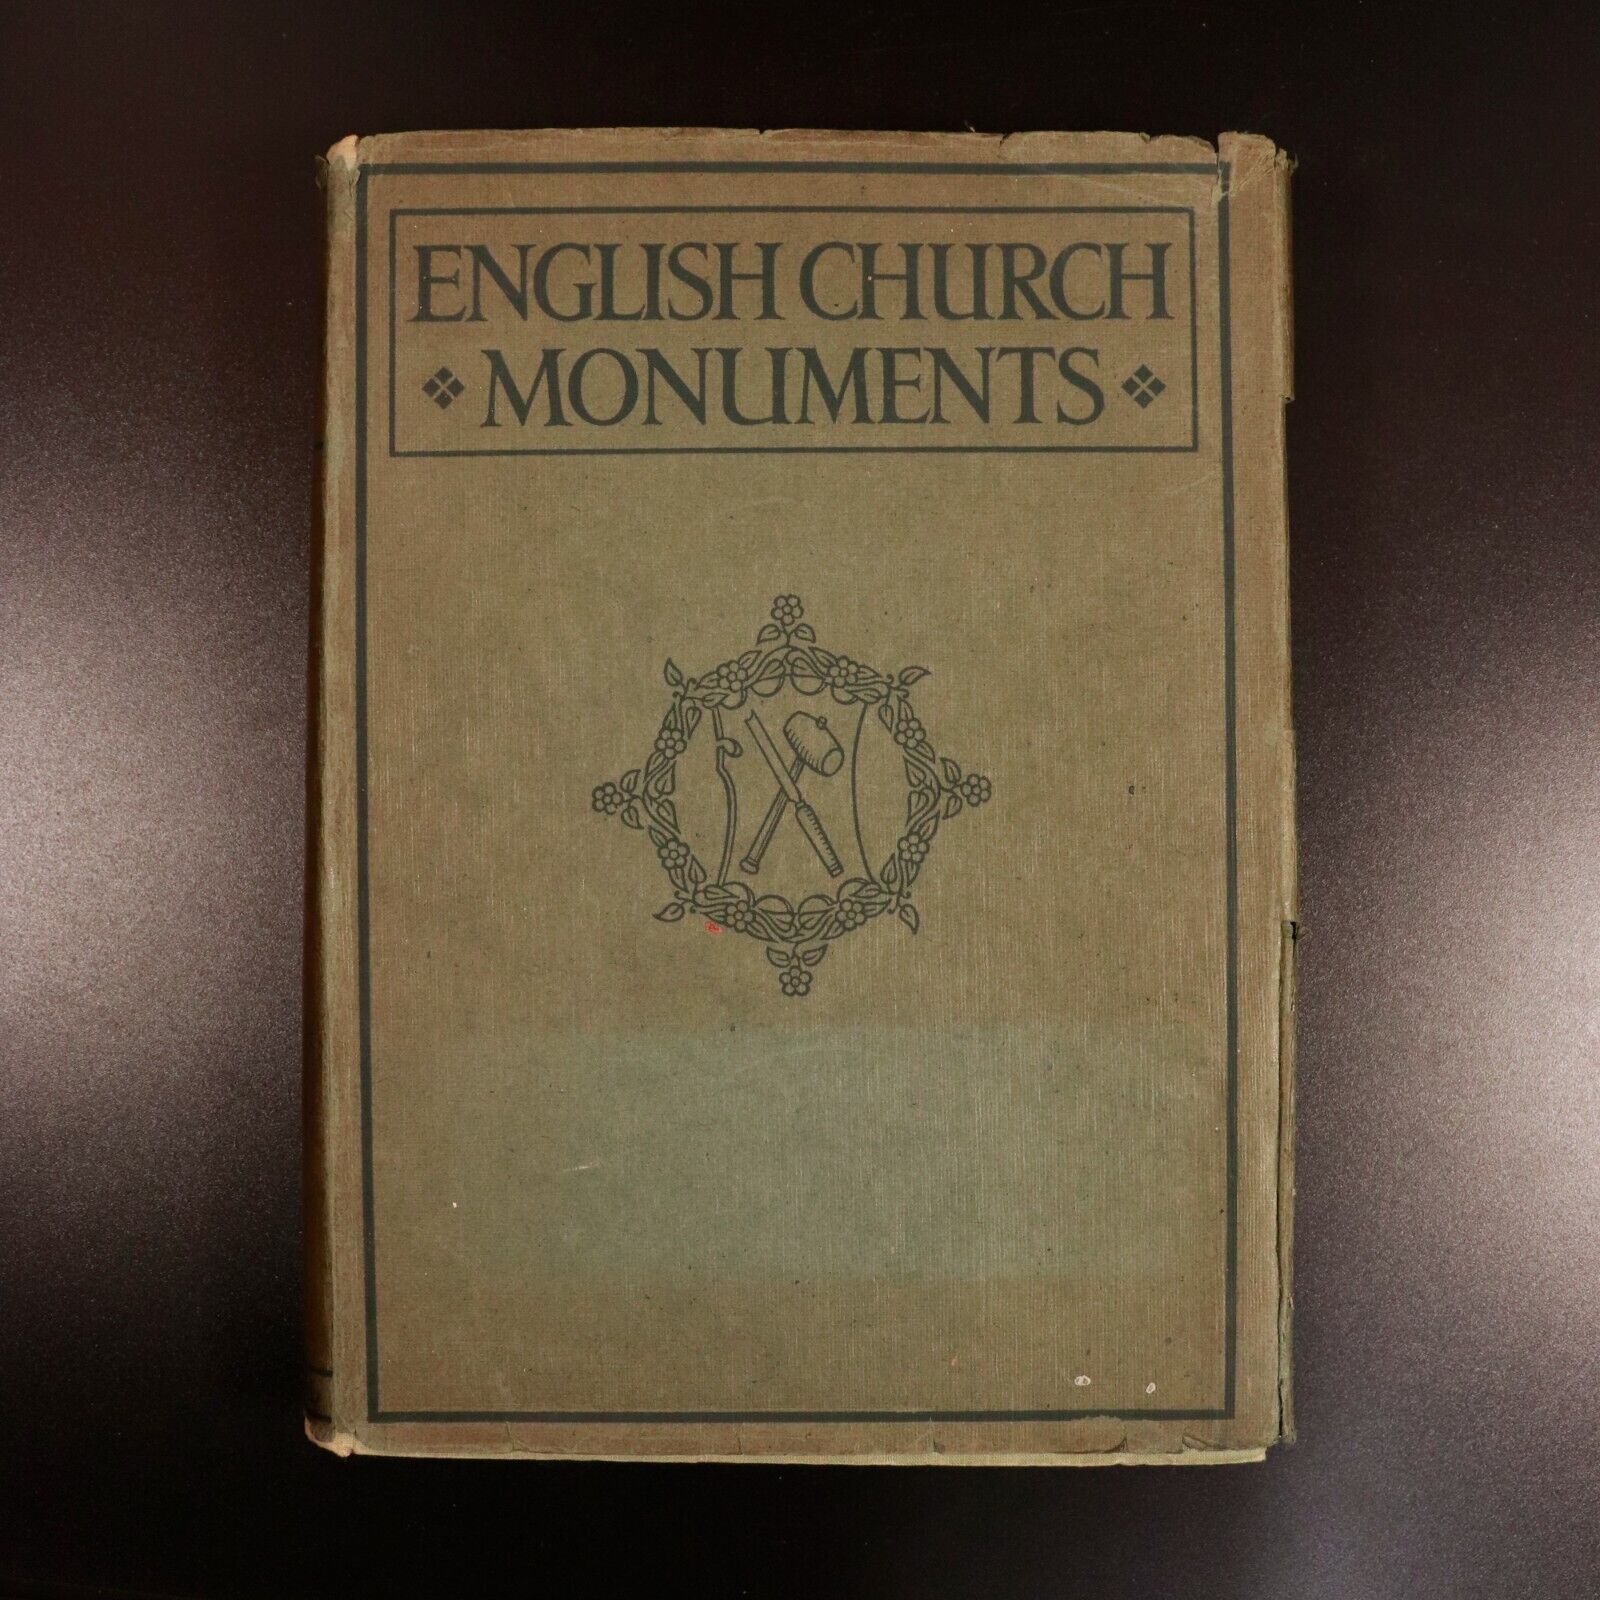 1921 English Church Monuments 1150 - 1550 F. Crossley Antique Architecture Book